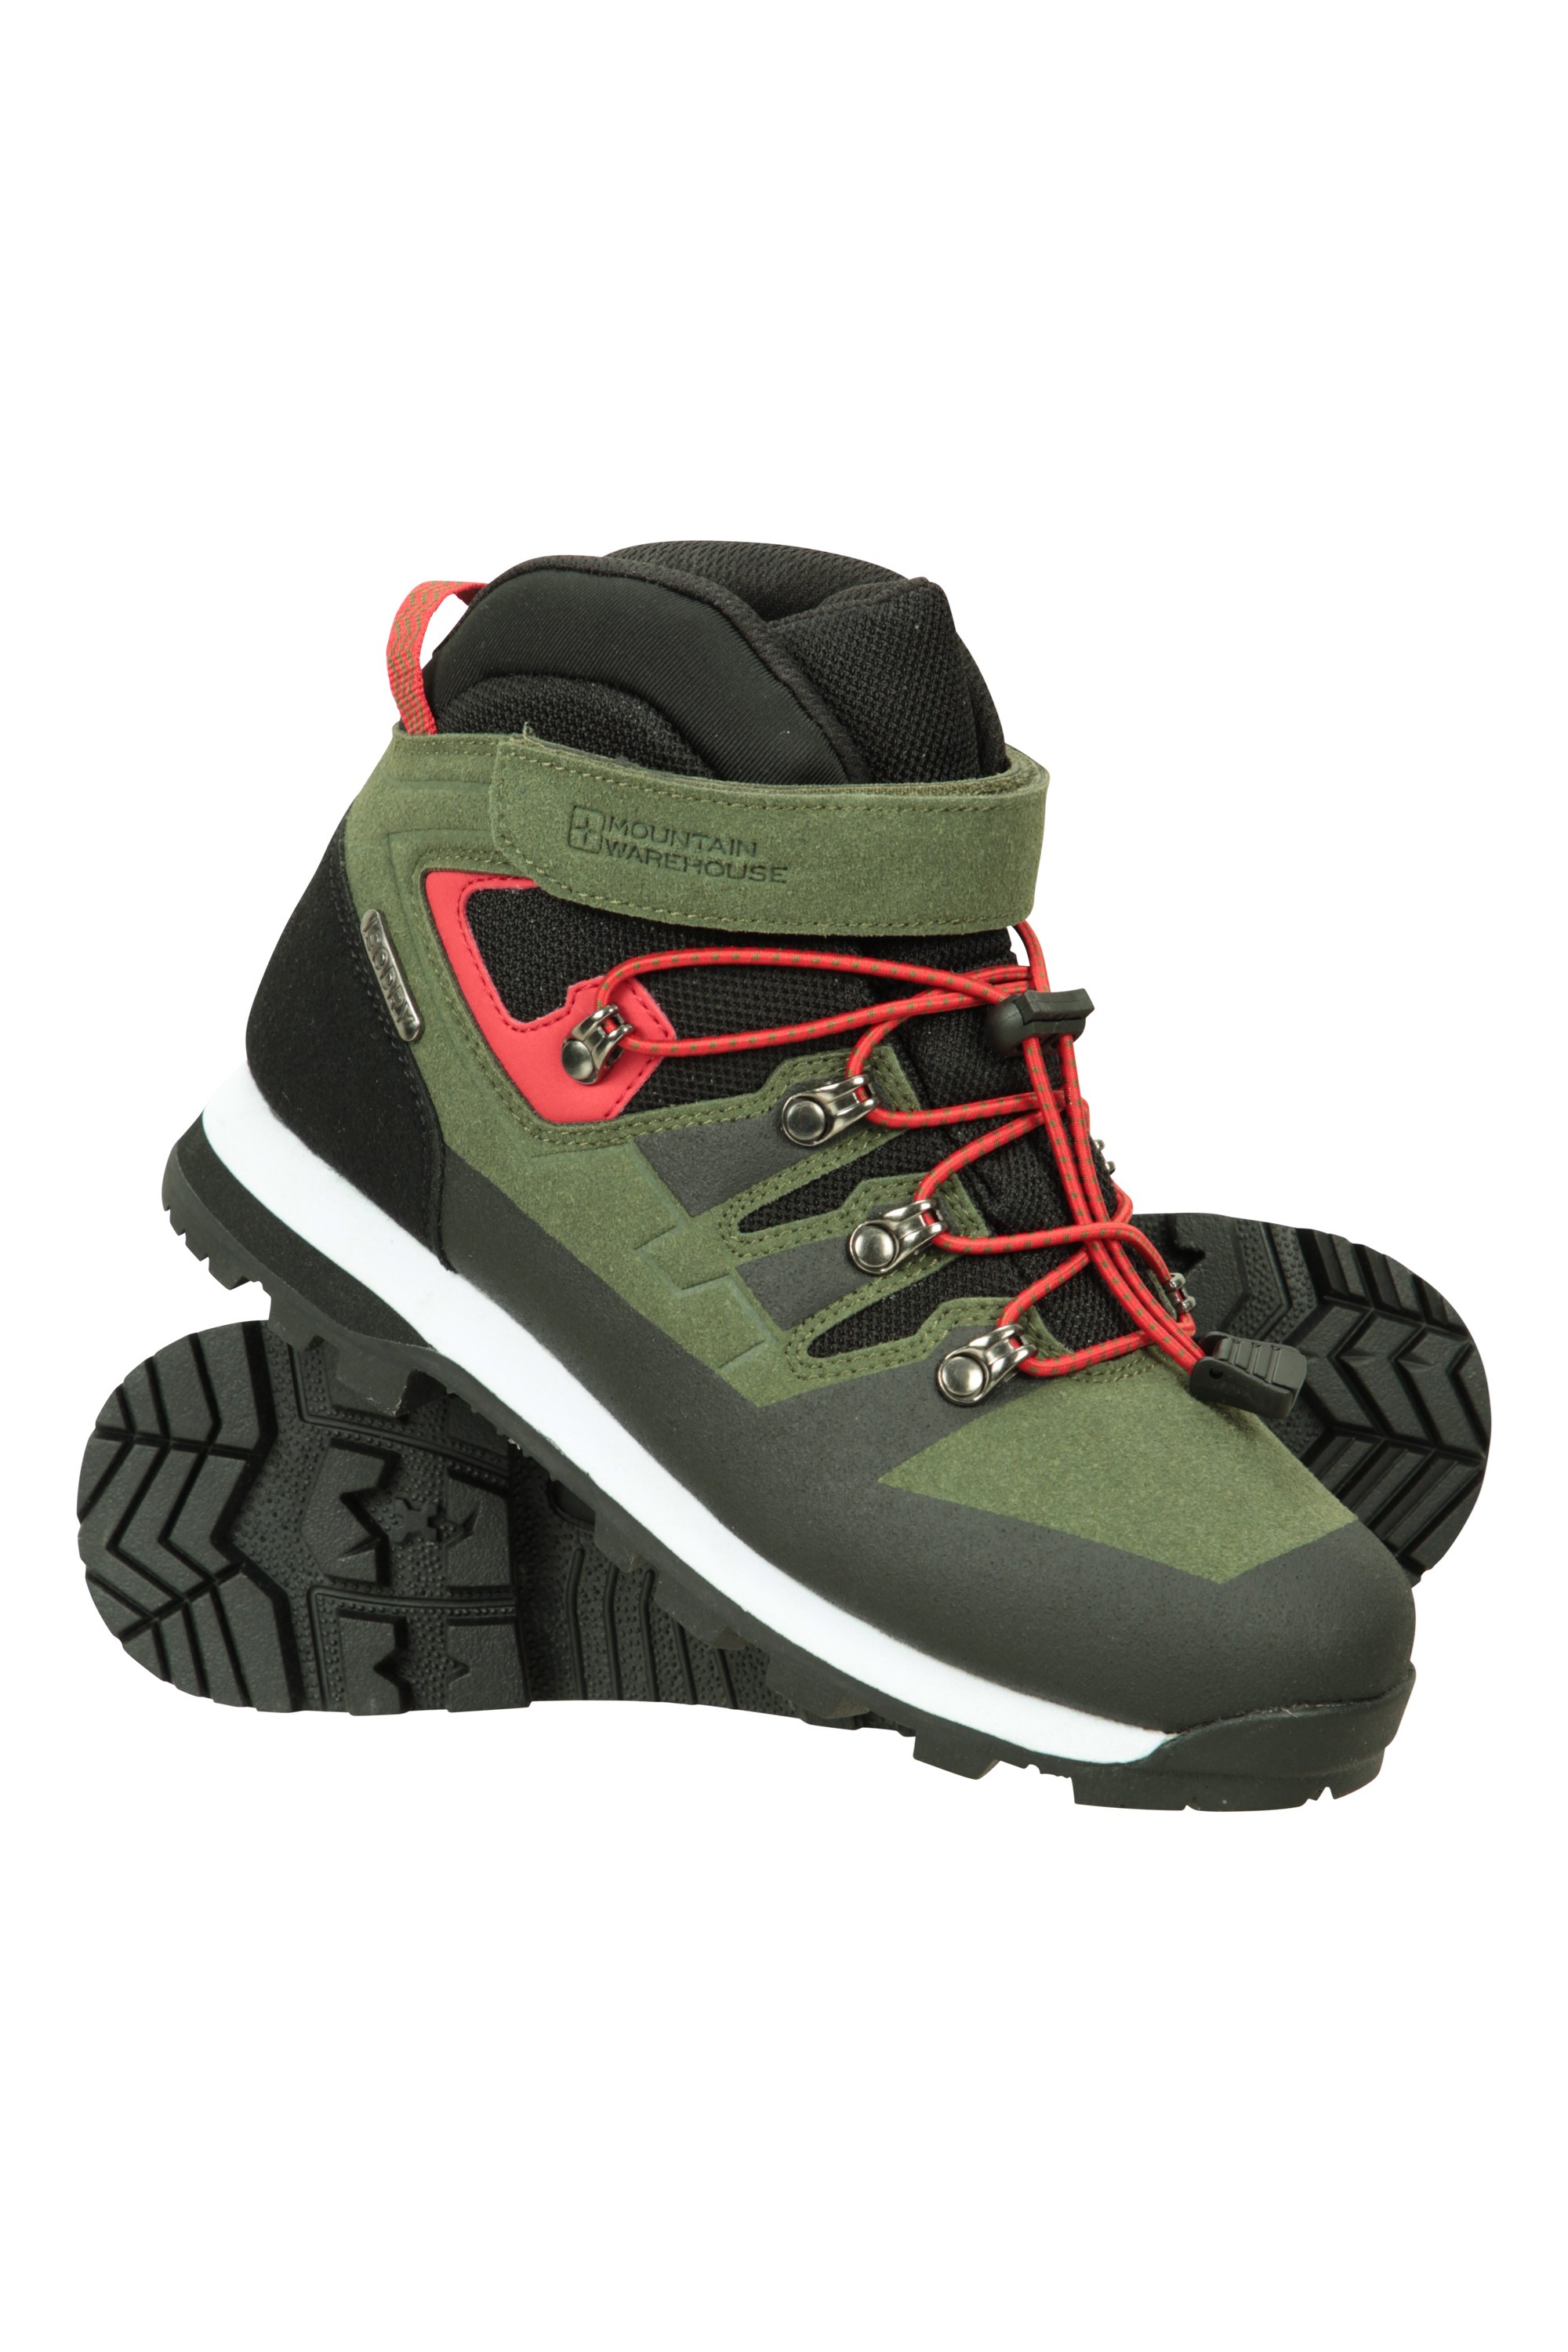 Mountain Warehouse Waterproof Kids Boots Breathable Hiking Shoes 